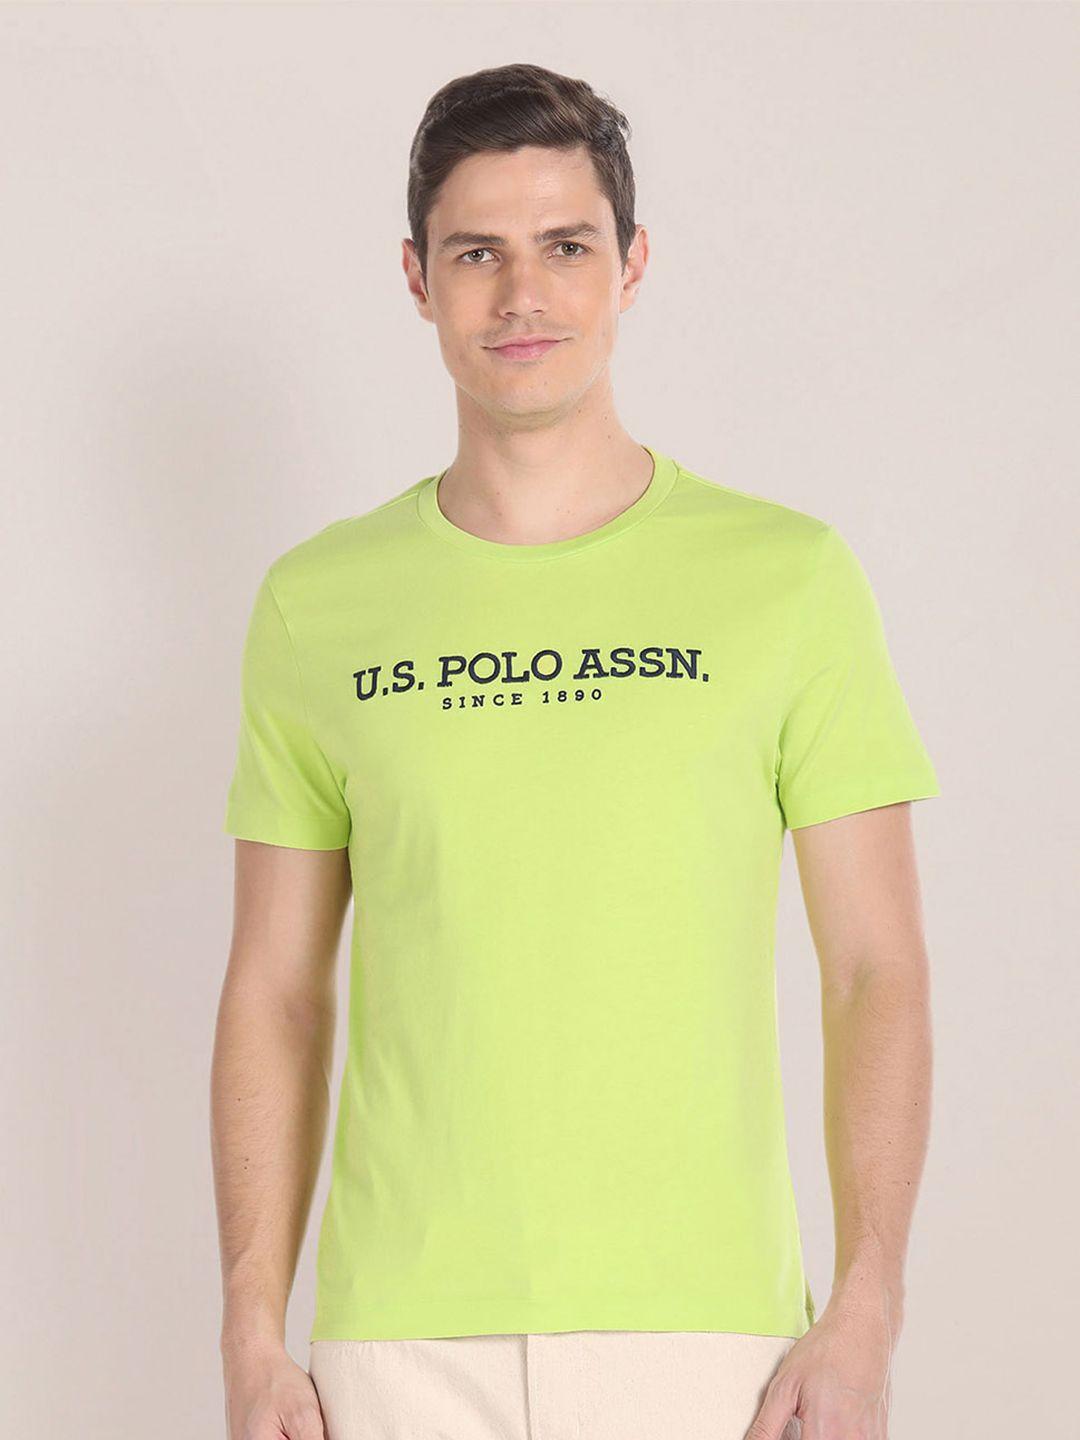 u.s. polo assn. typography embroidered pure cotton t-shirt